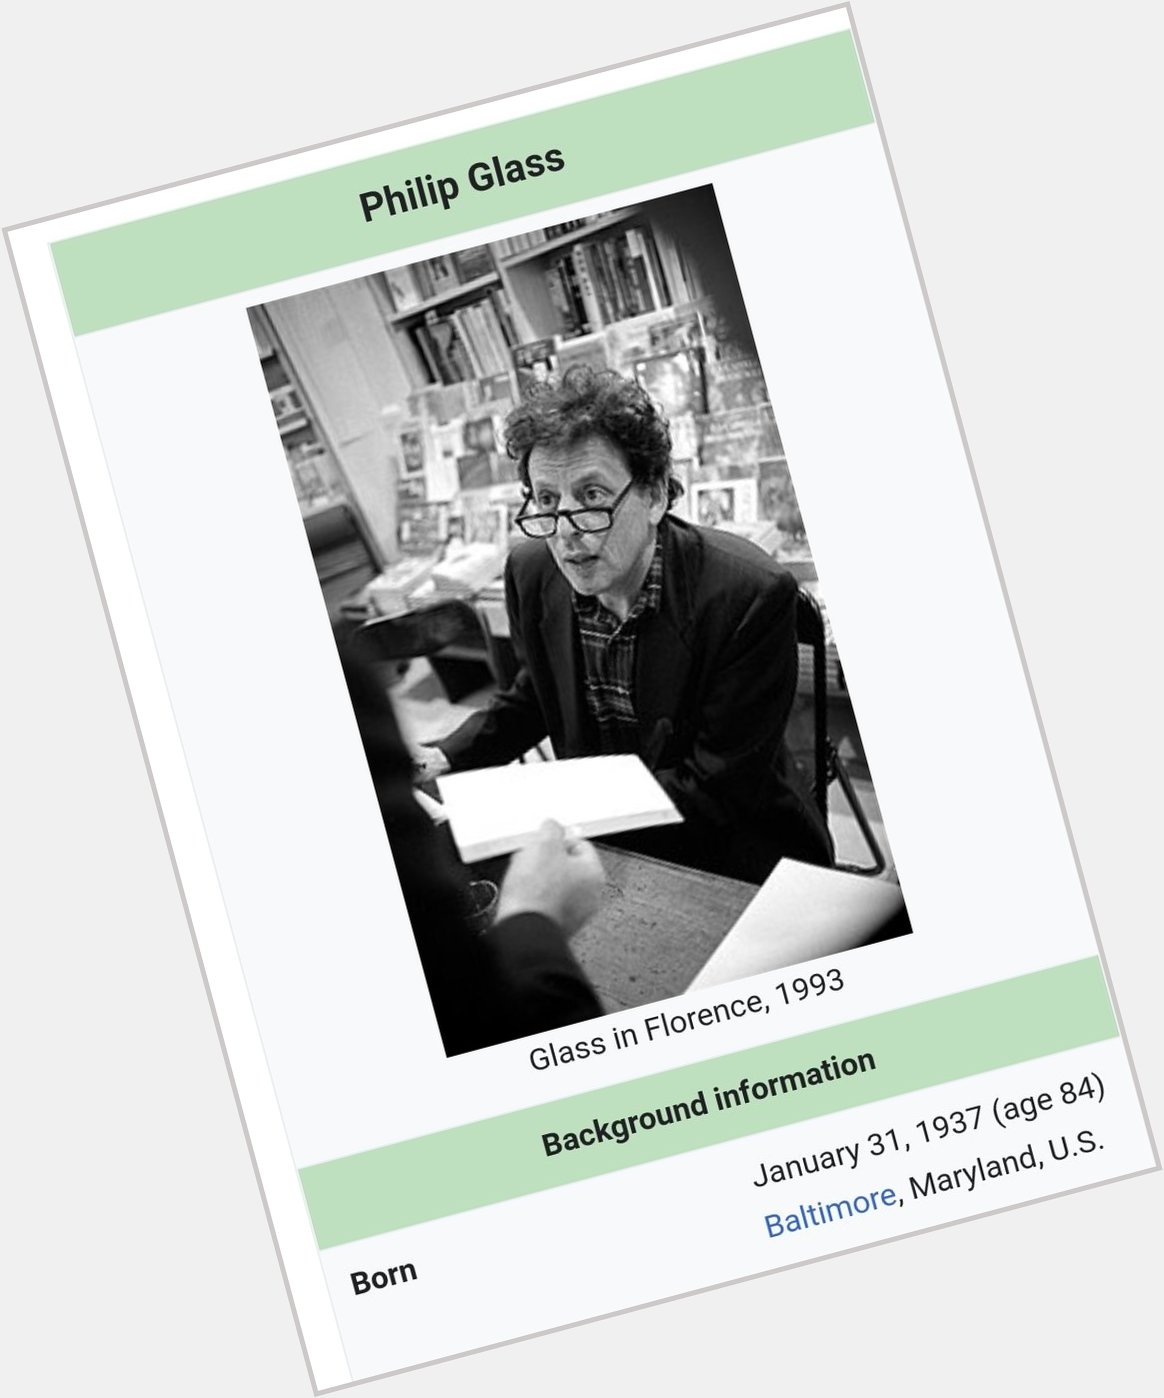 Happy Birthday to Philip Glass and absolutely no one/nothing else 